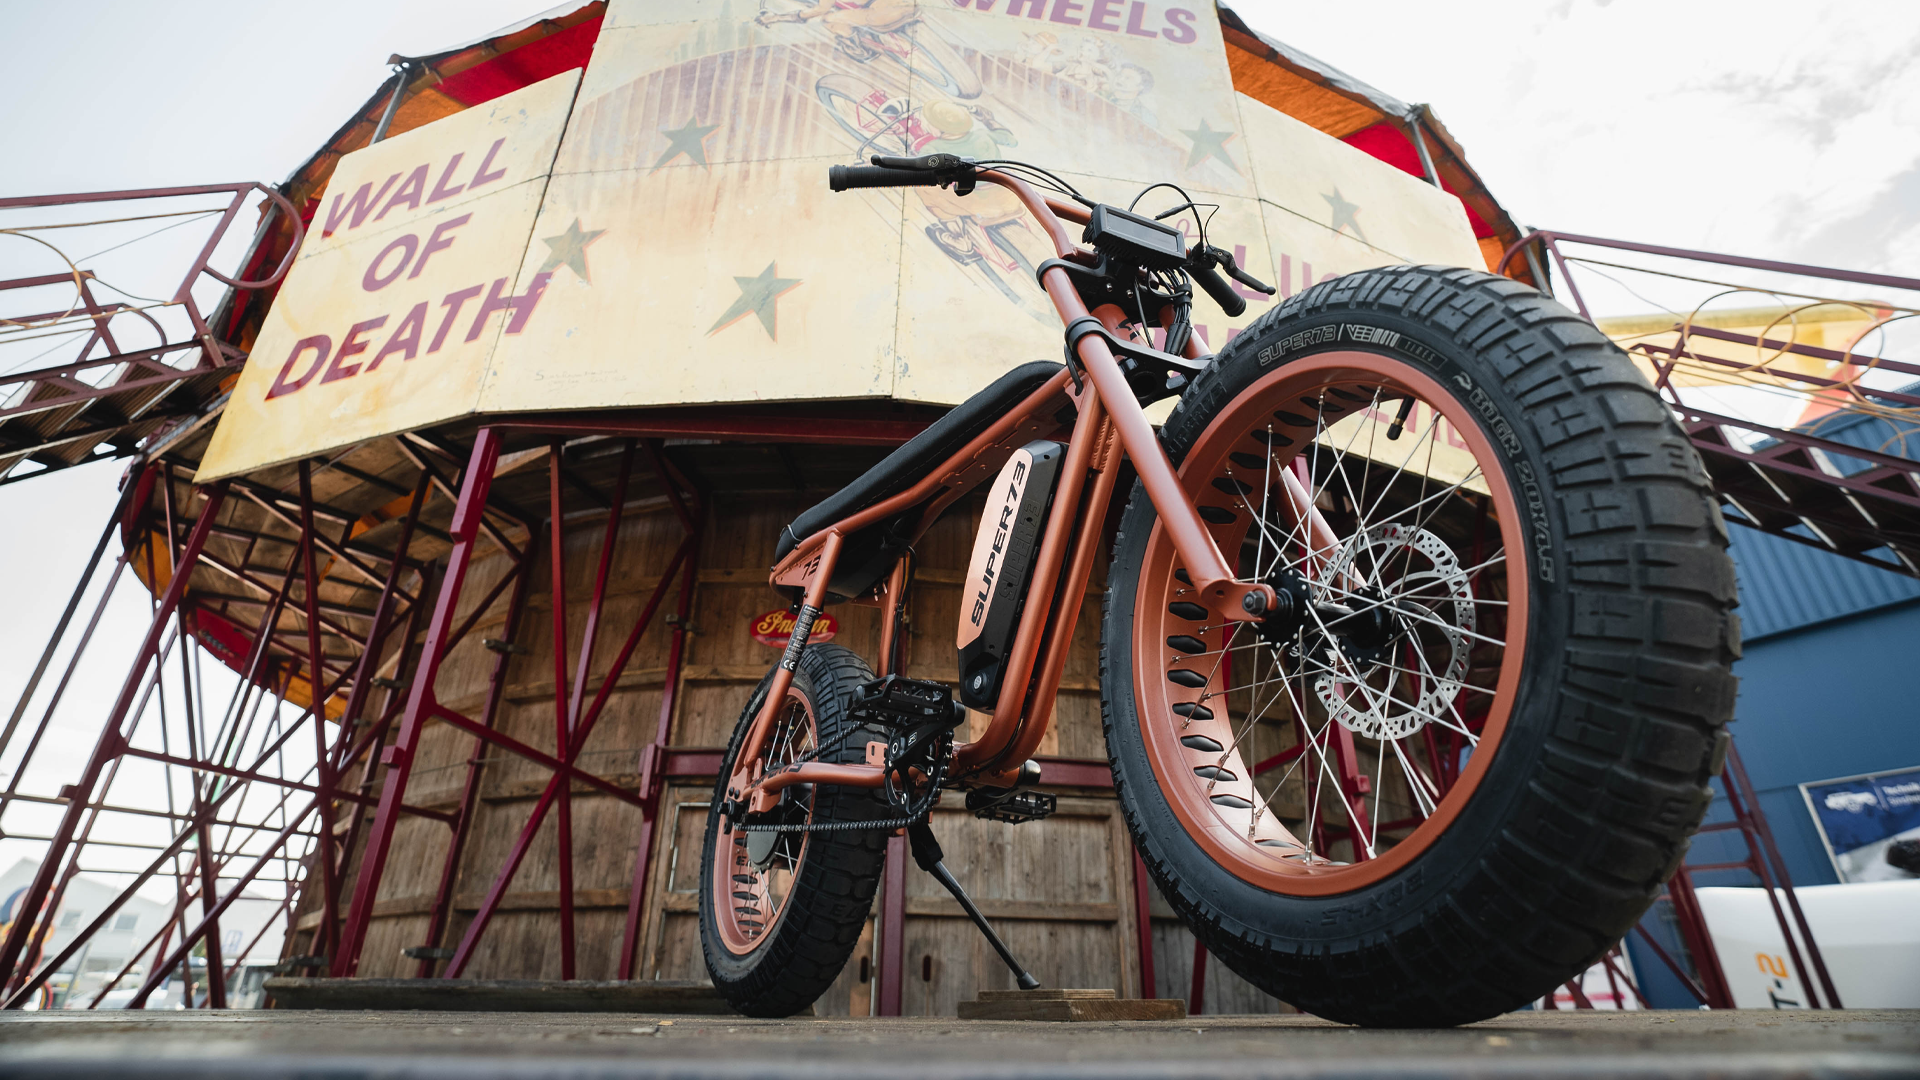 Super73 tribute bike to the Wall of Death